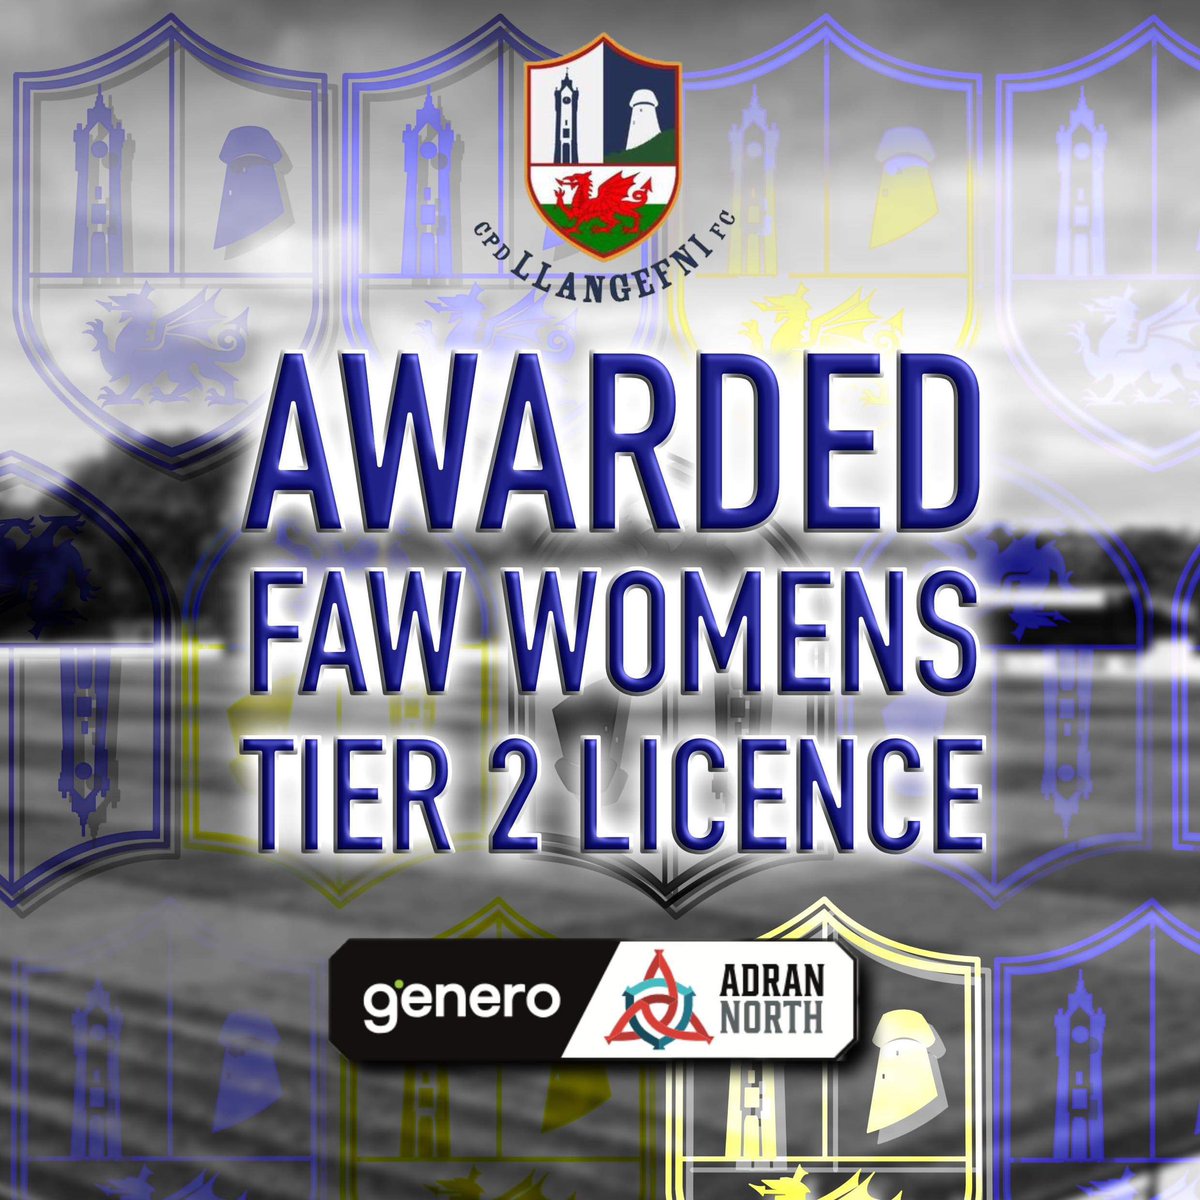 🔵Club Announcement🔵

Llangefni Town Ladies would like to announce that we have today been granted our FAW Tier 2 Licence for season 24/25.